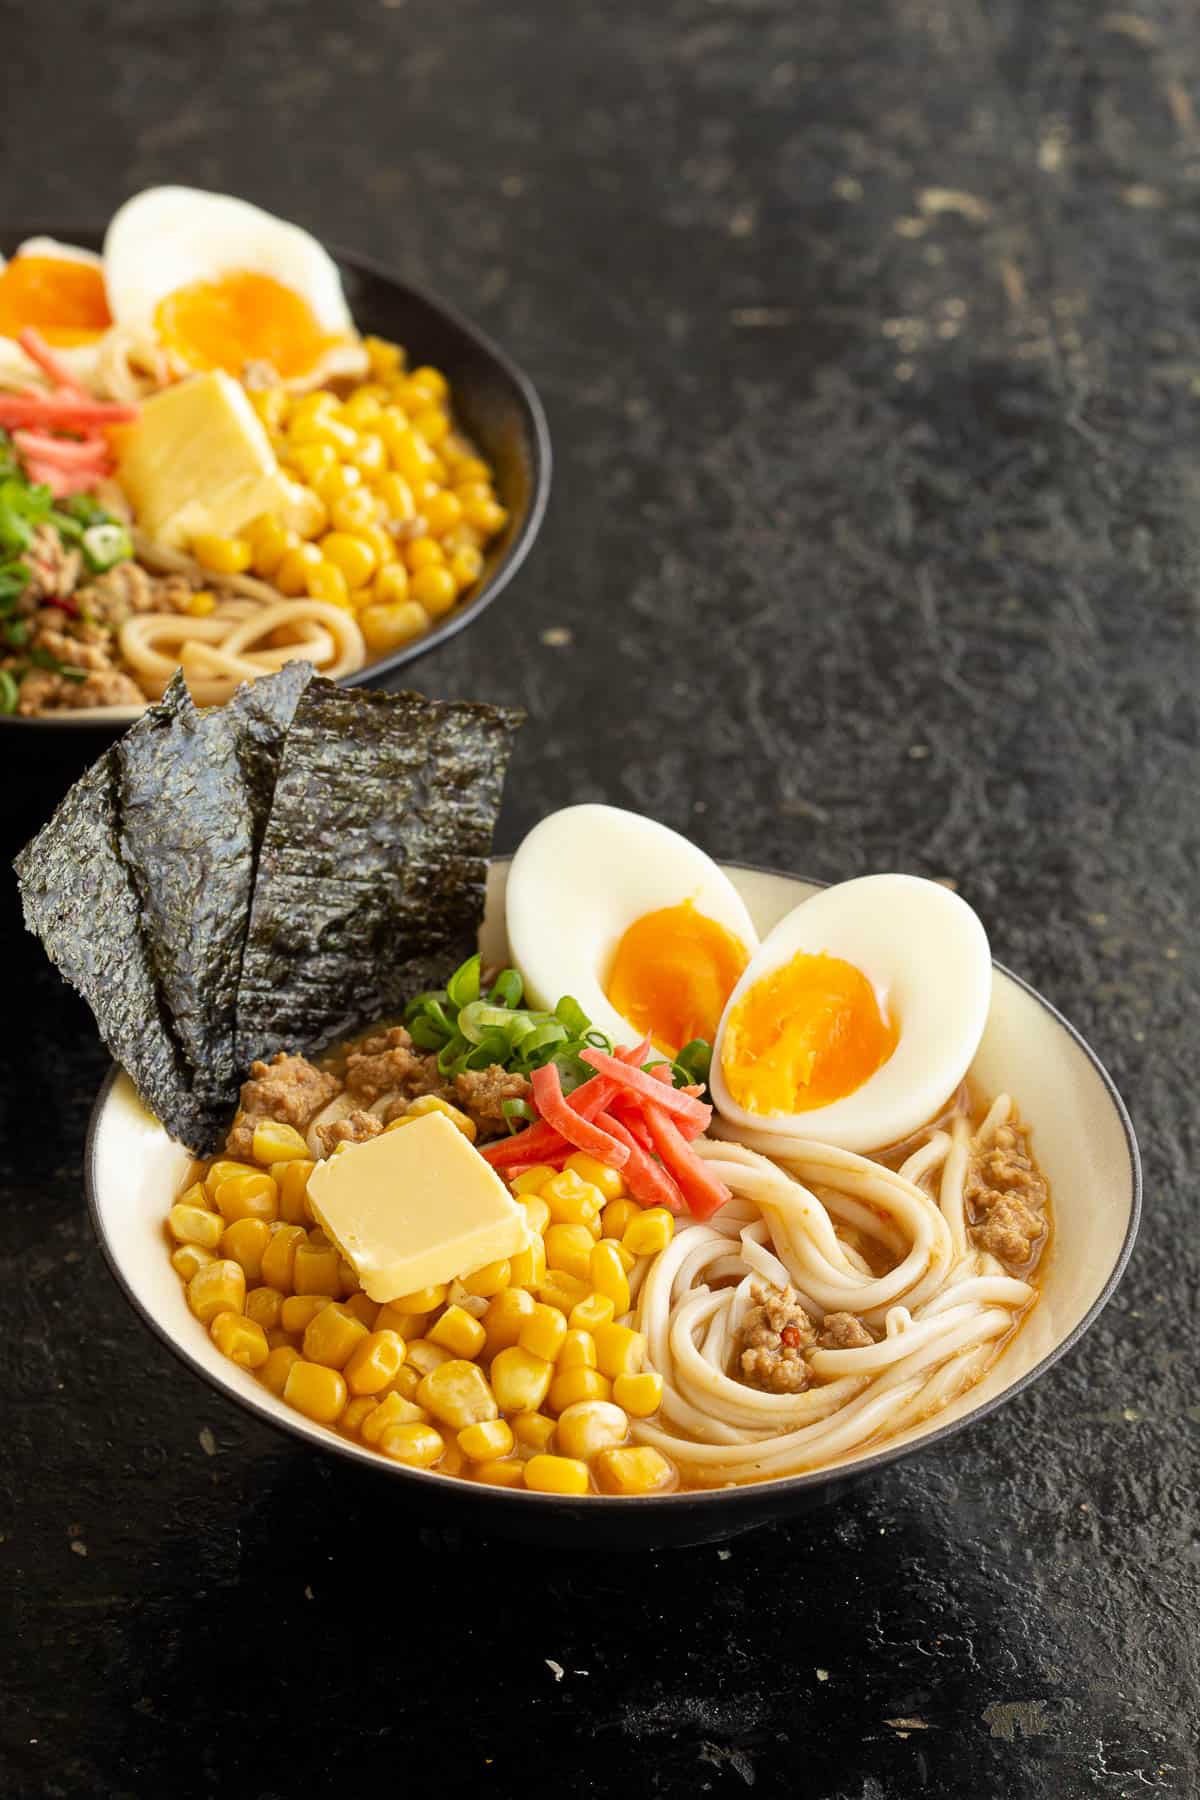 Miso ramen bowls with soft boiled eggs, corn, nori and buttered corn.